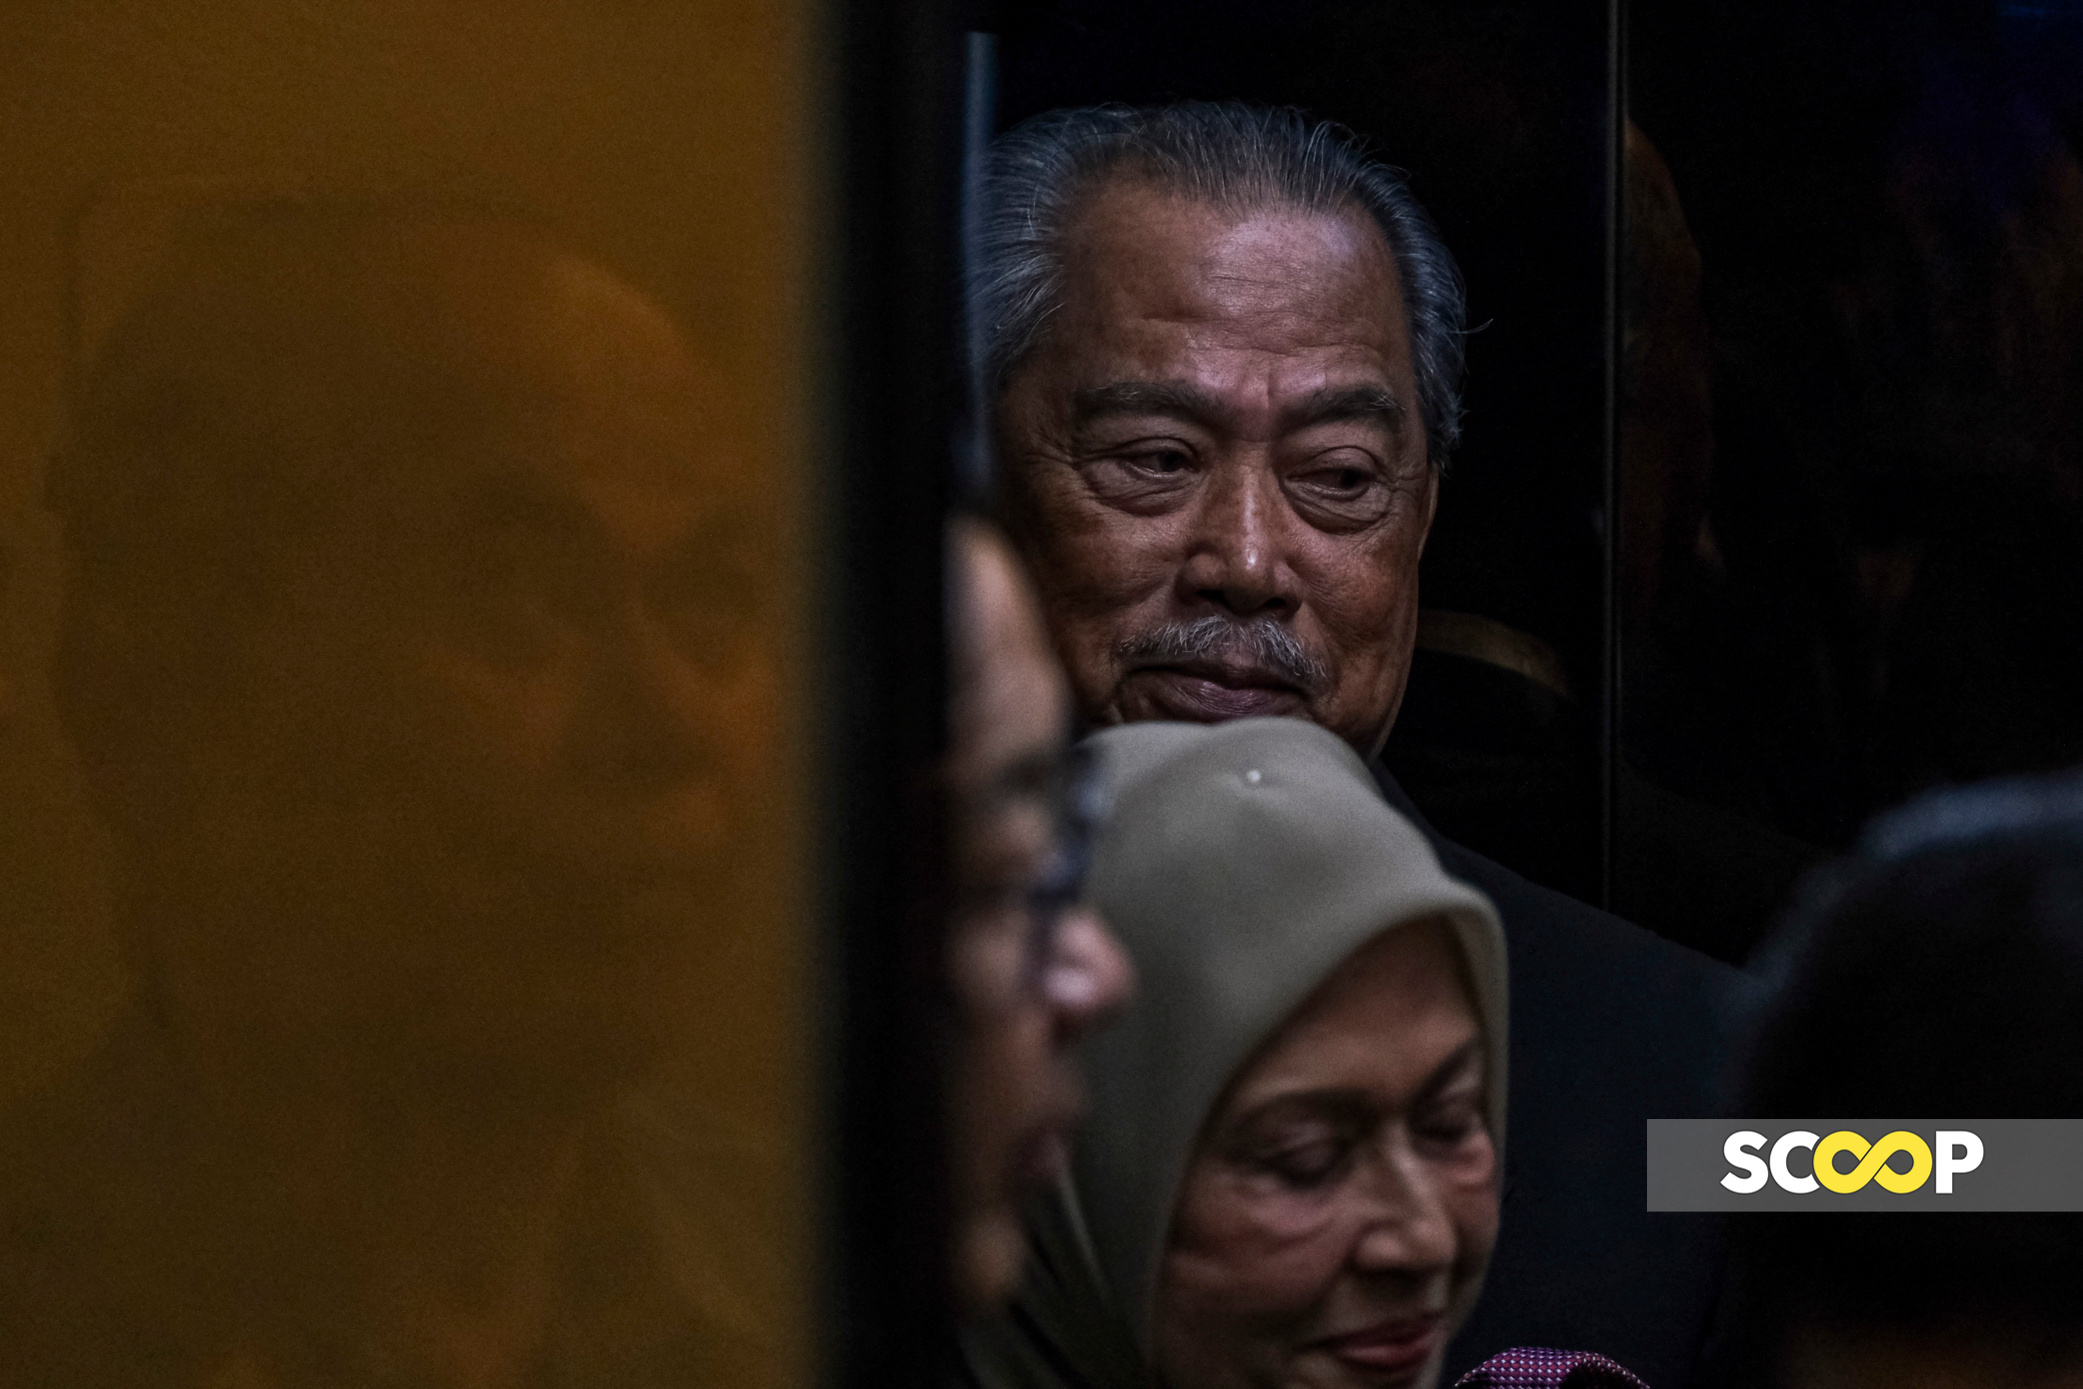 Muhyiddin acquitted, judge rules all four charges ‘vague, flawed, unfounded’